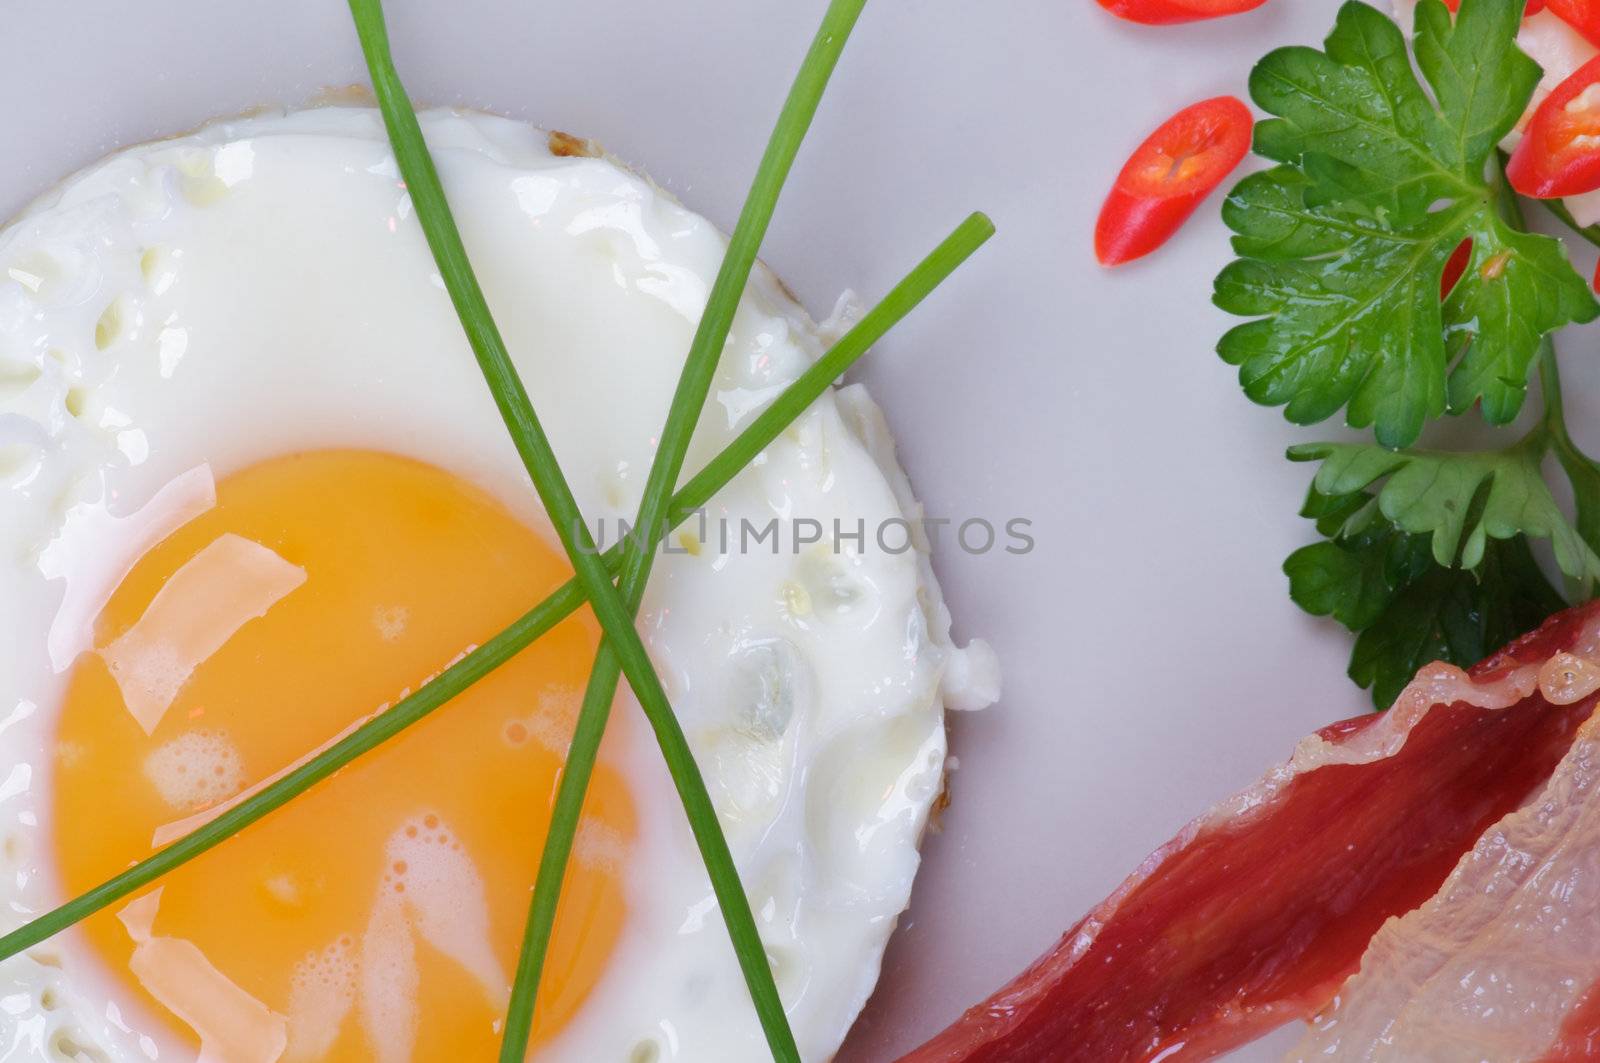 Fried Eggs Sunny Side Up with Bacon, Parsley and Lettuce by zhekos